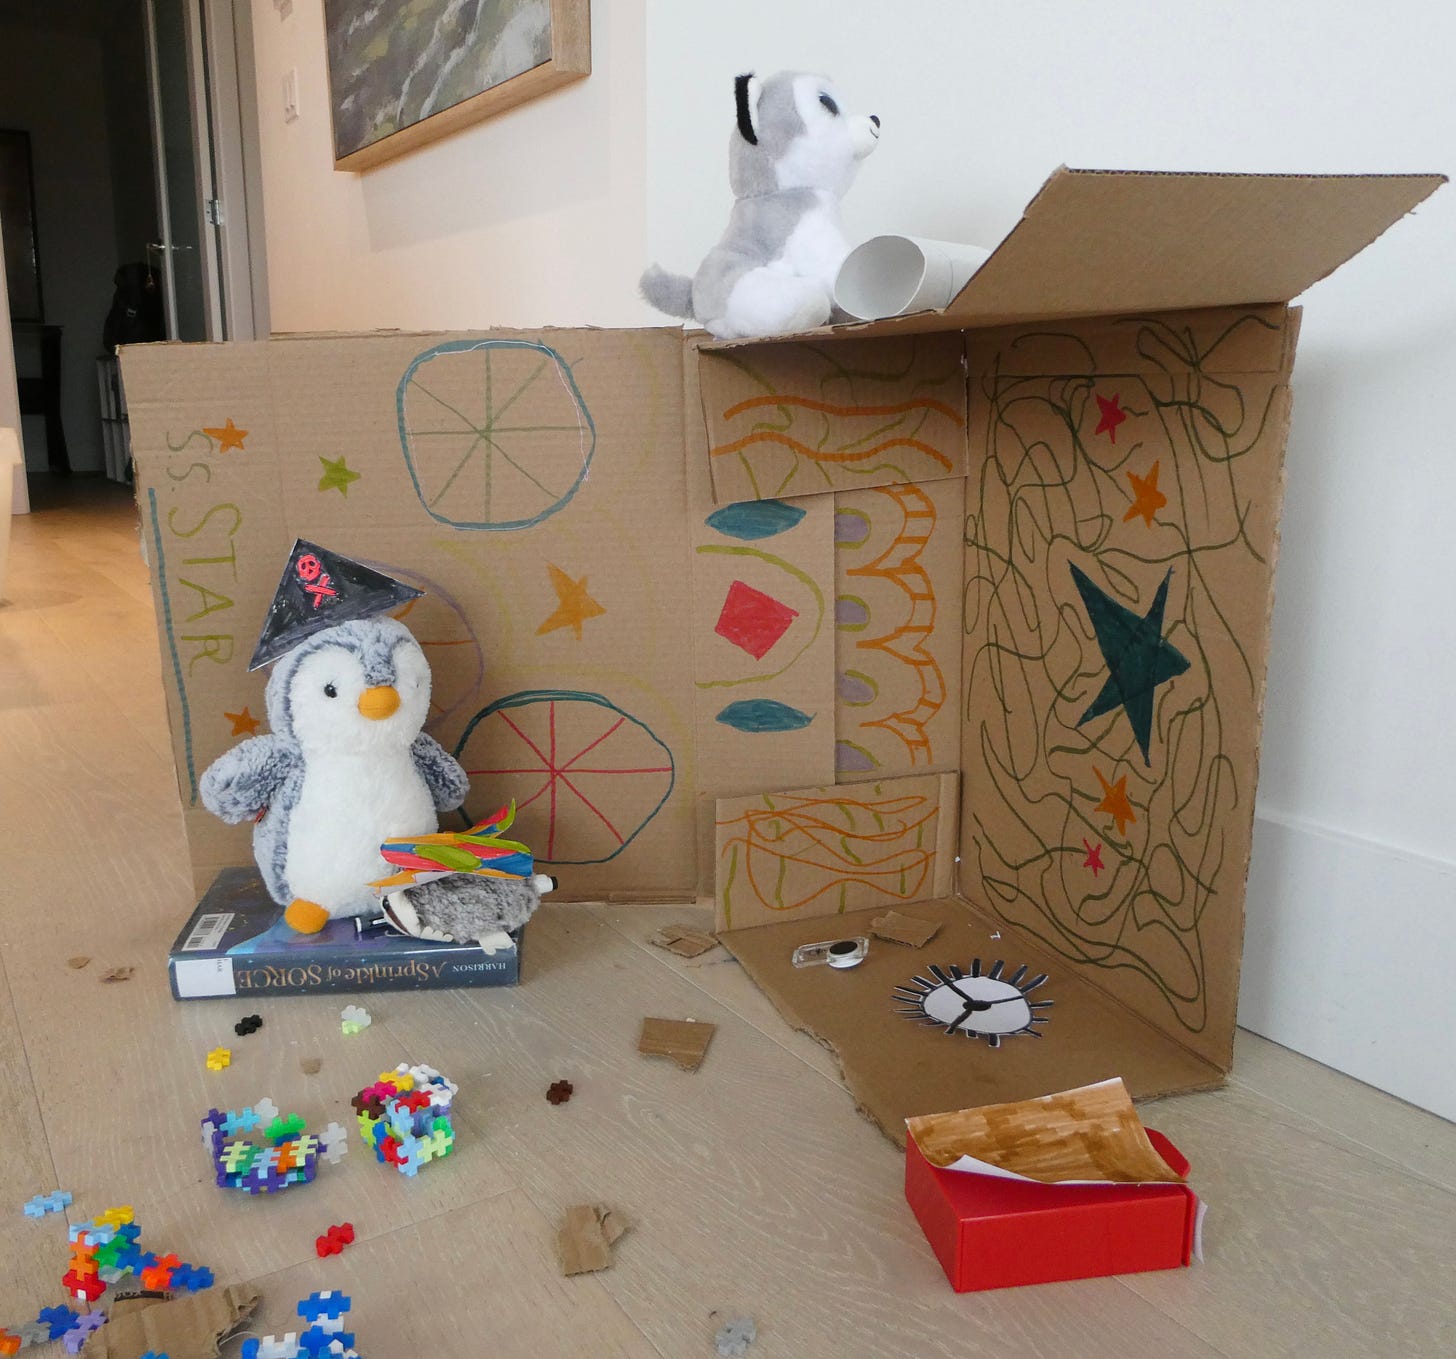 stuffed animals and a cardboard backdrop decorated as pirate ship